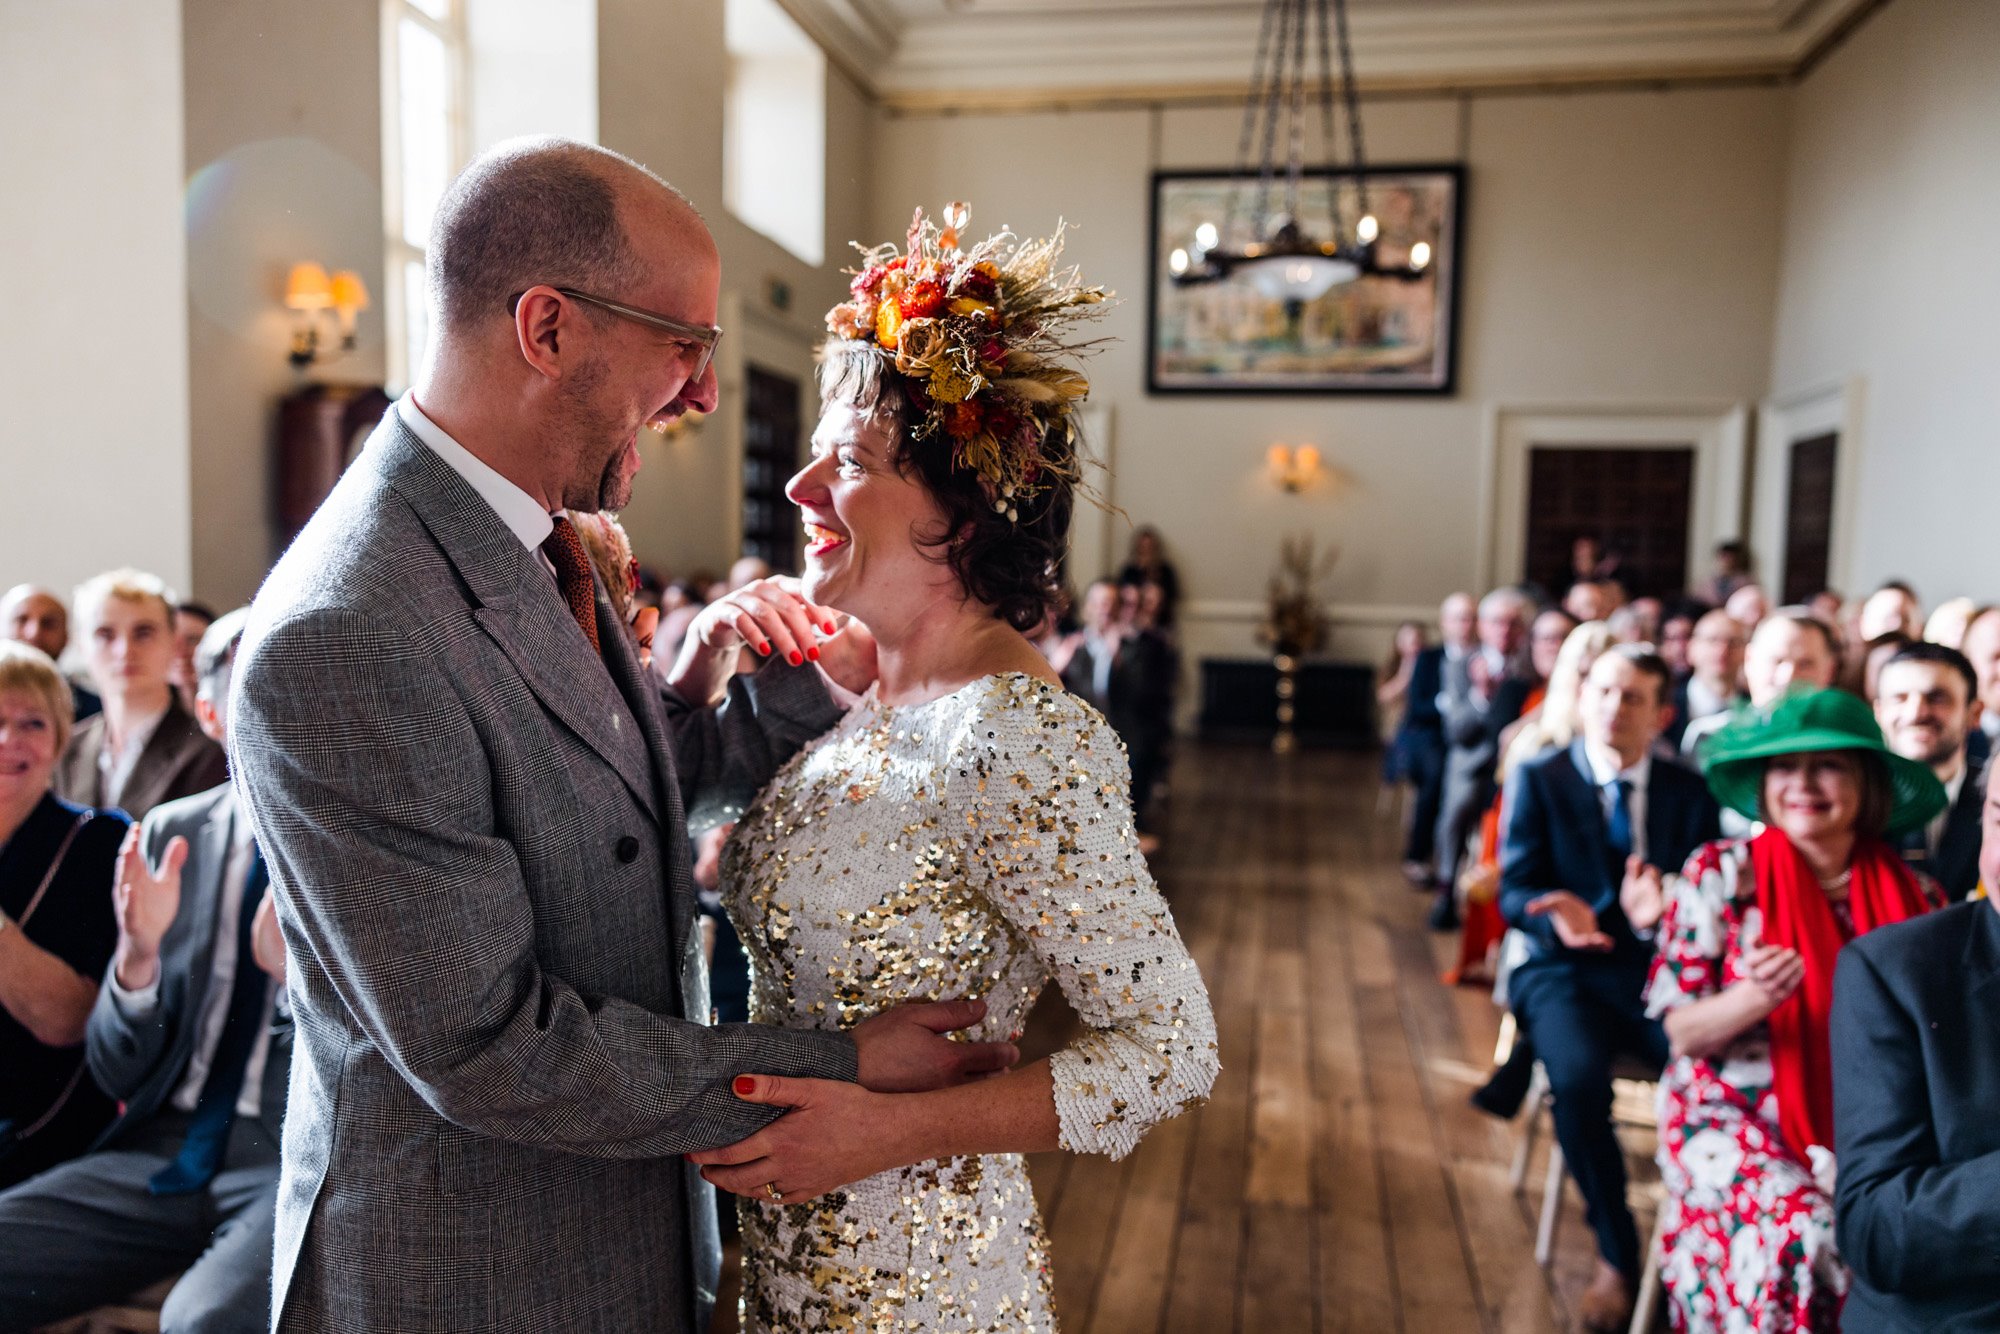 Older bride in flower headdress and sequin dress and groom in grey suit in joyful embrace at wedding ceremony in stately home